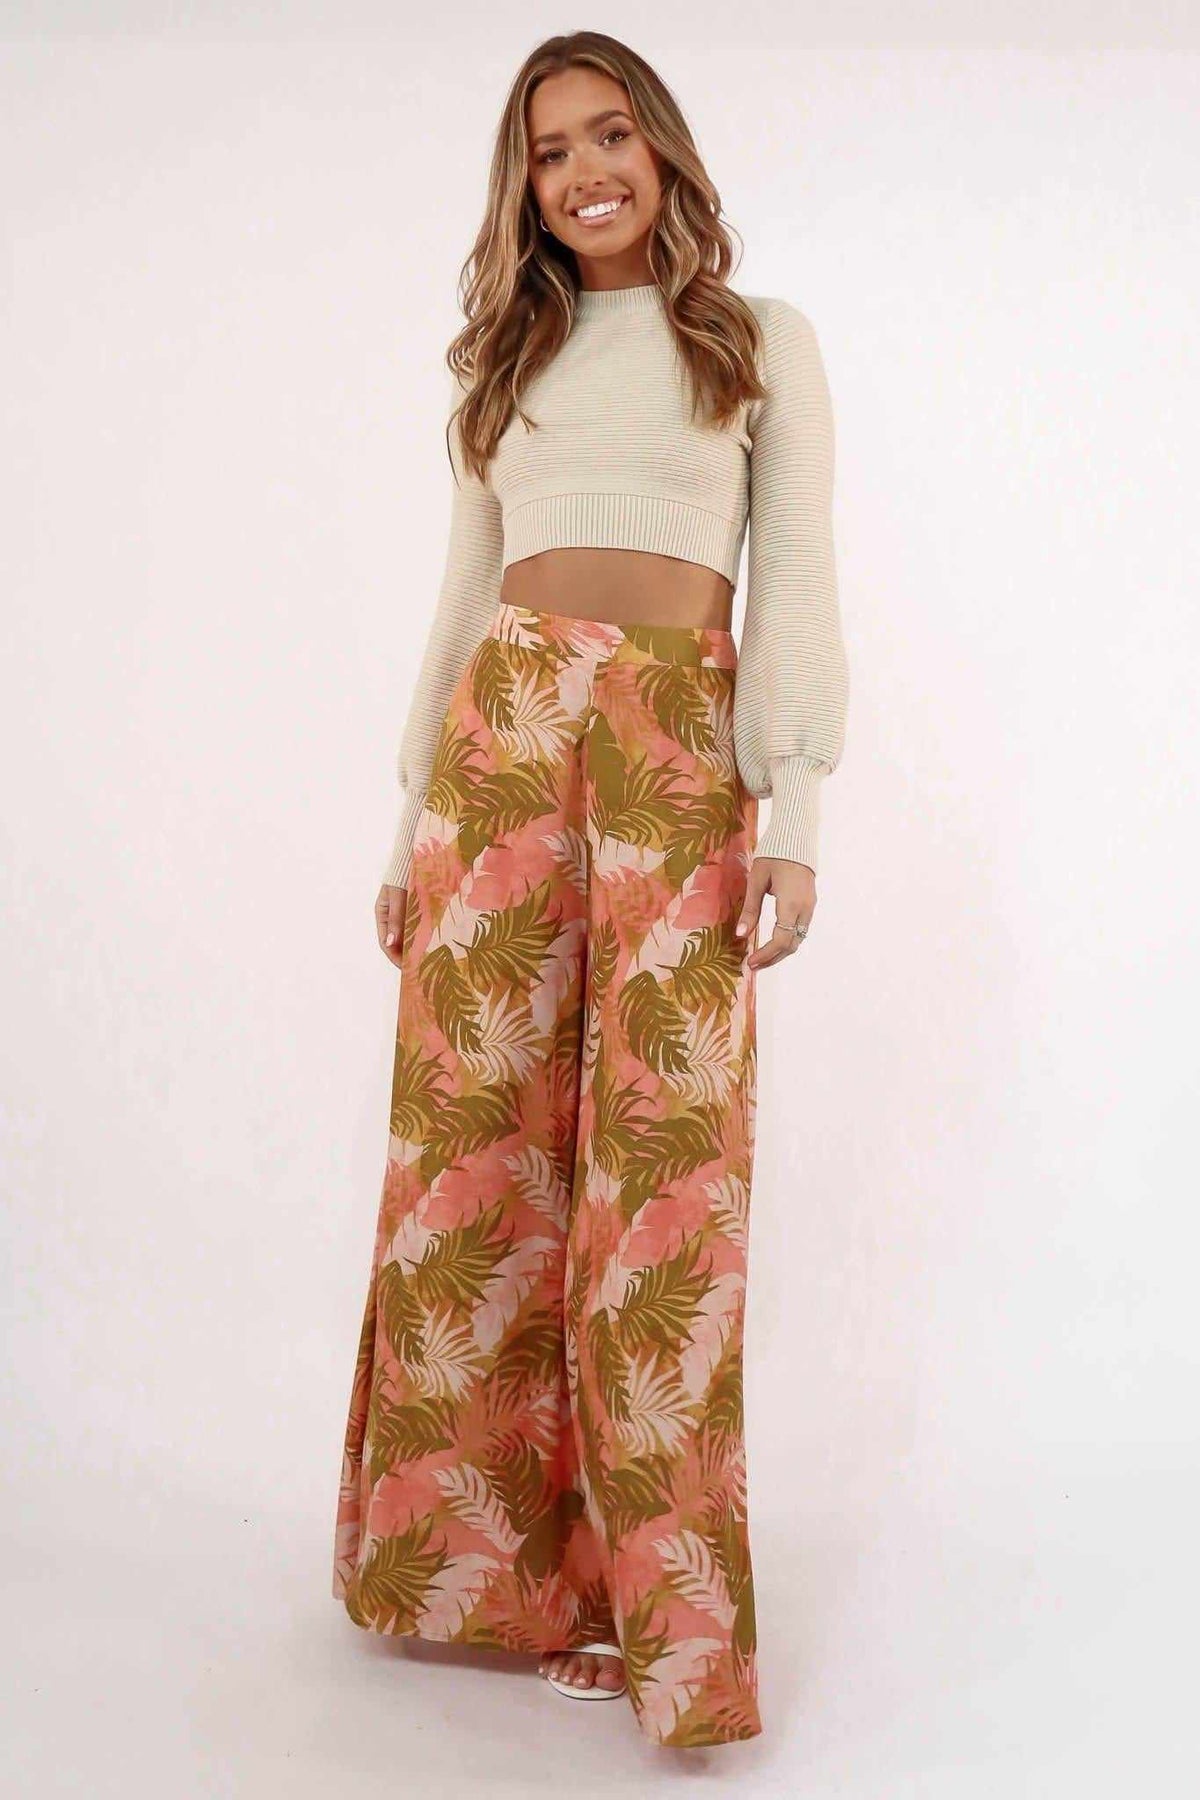 Steff Pants, BOTTOMS, ORANGE, PANTS, RAYON, , Our New Steff Pants is only $61.00-We Have The Latest Pants | Shorts | Skirts @ Mishkah Online Fashion Boutique-MISHKAH